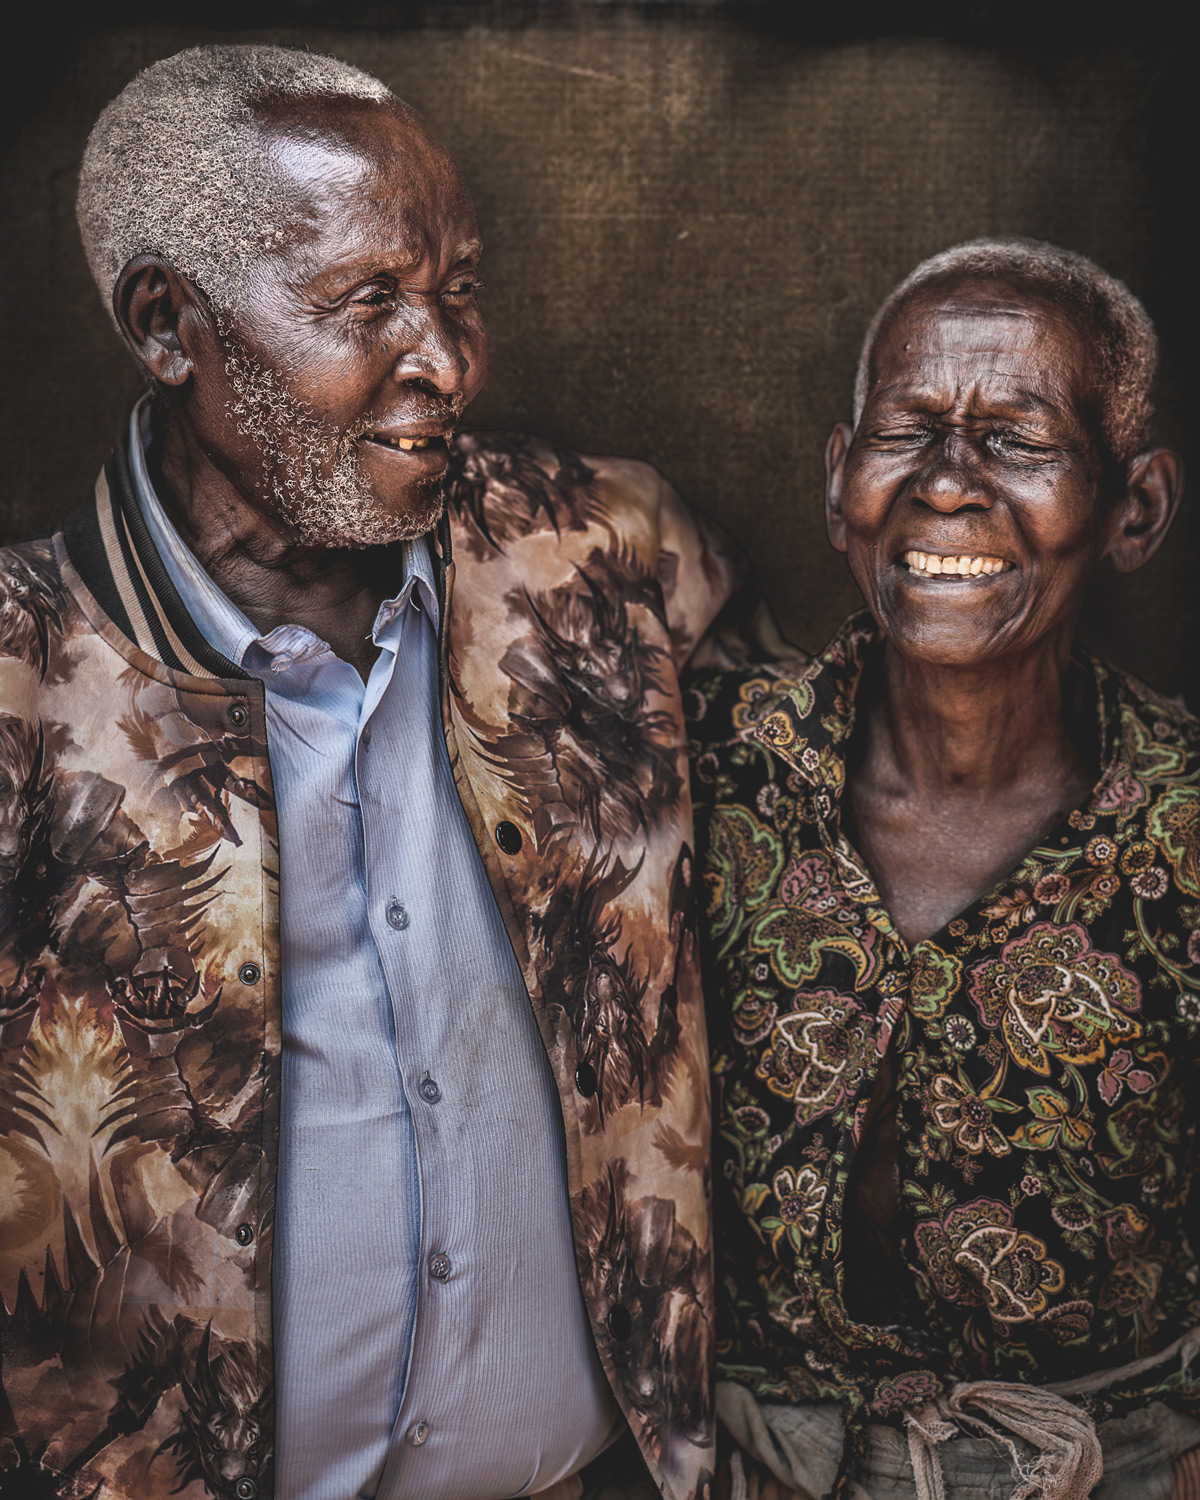 Mzee (100) poses with his wife (90) for a portrait in Jinja, Uganda © Bob Ditty